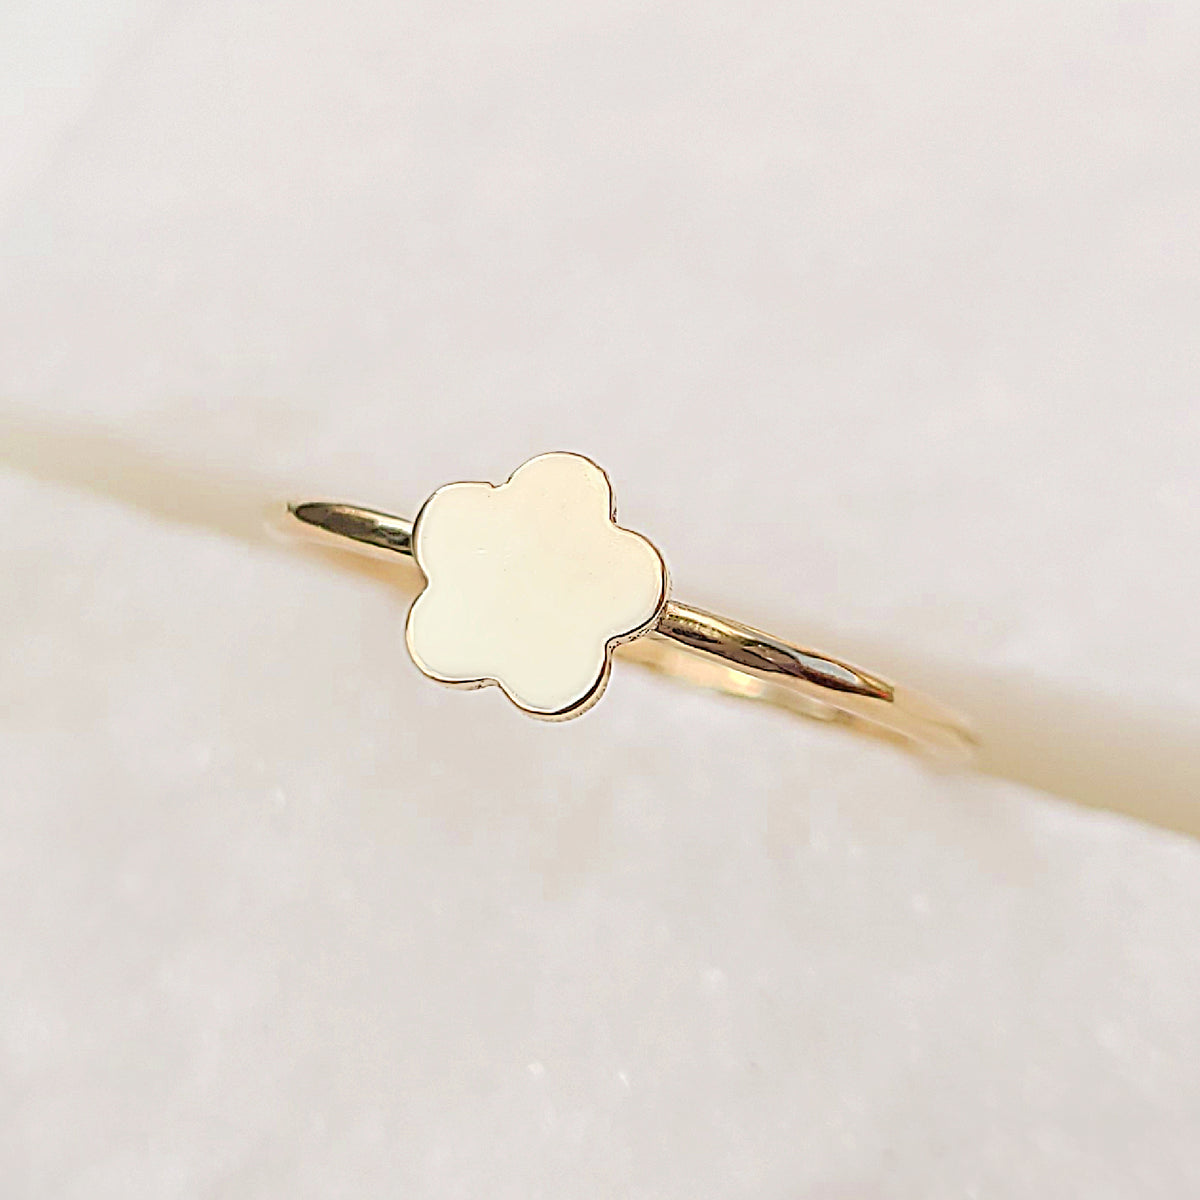 Sincerely Ginger Jewelry 14K Minimalistic Daisy Ring in Yellow Gold